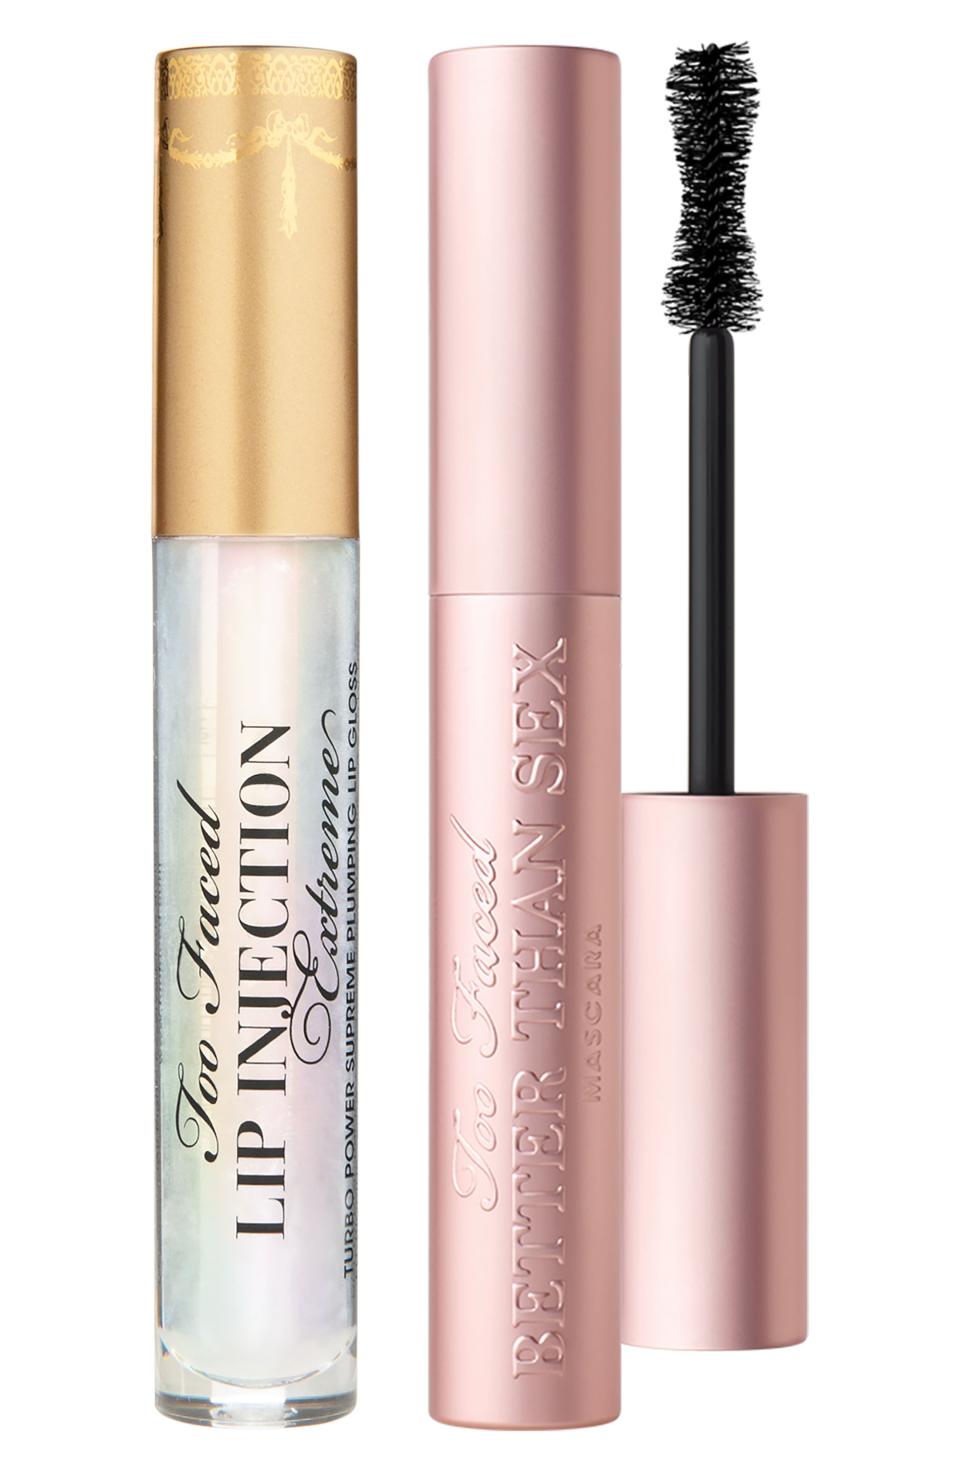 12) Plump Lips & Sexy Lashes Duo